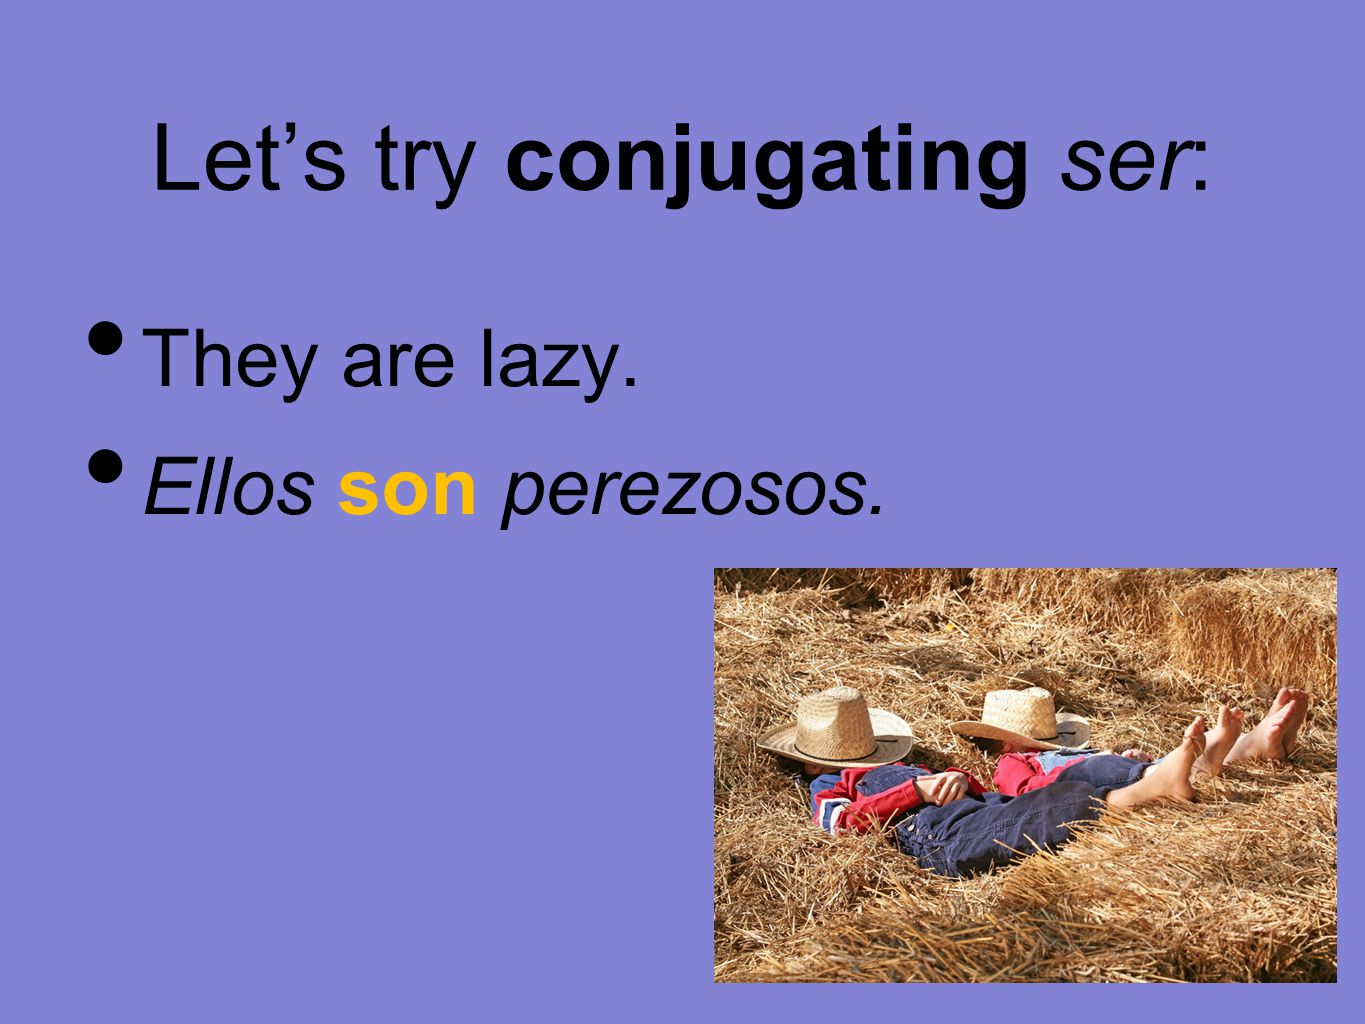 Let’s try conjugating ser: They are lazy. Ellos son perezosos.